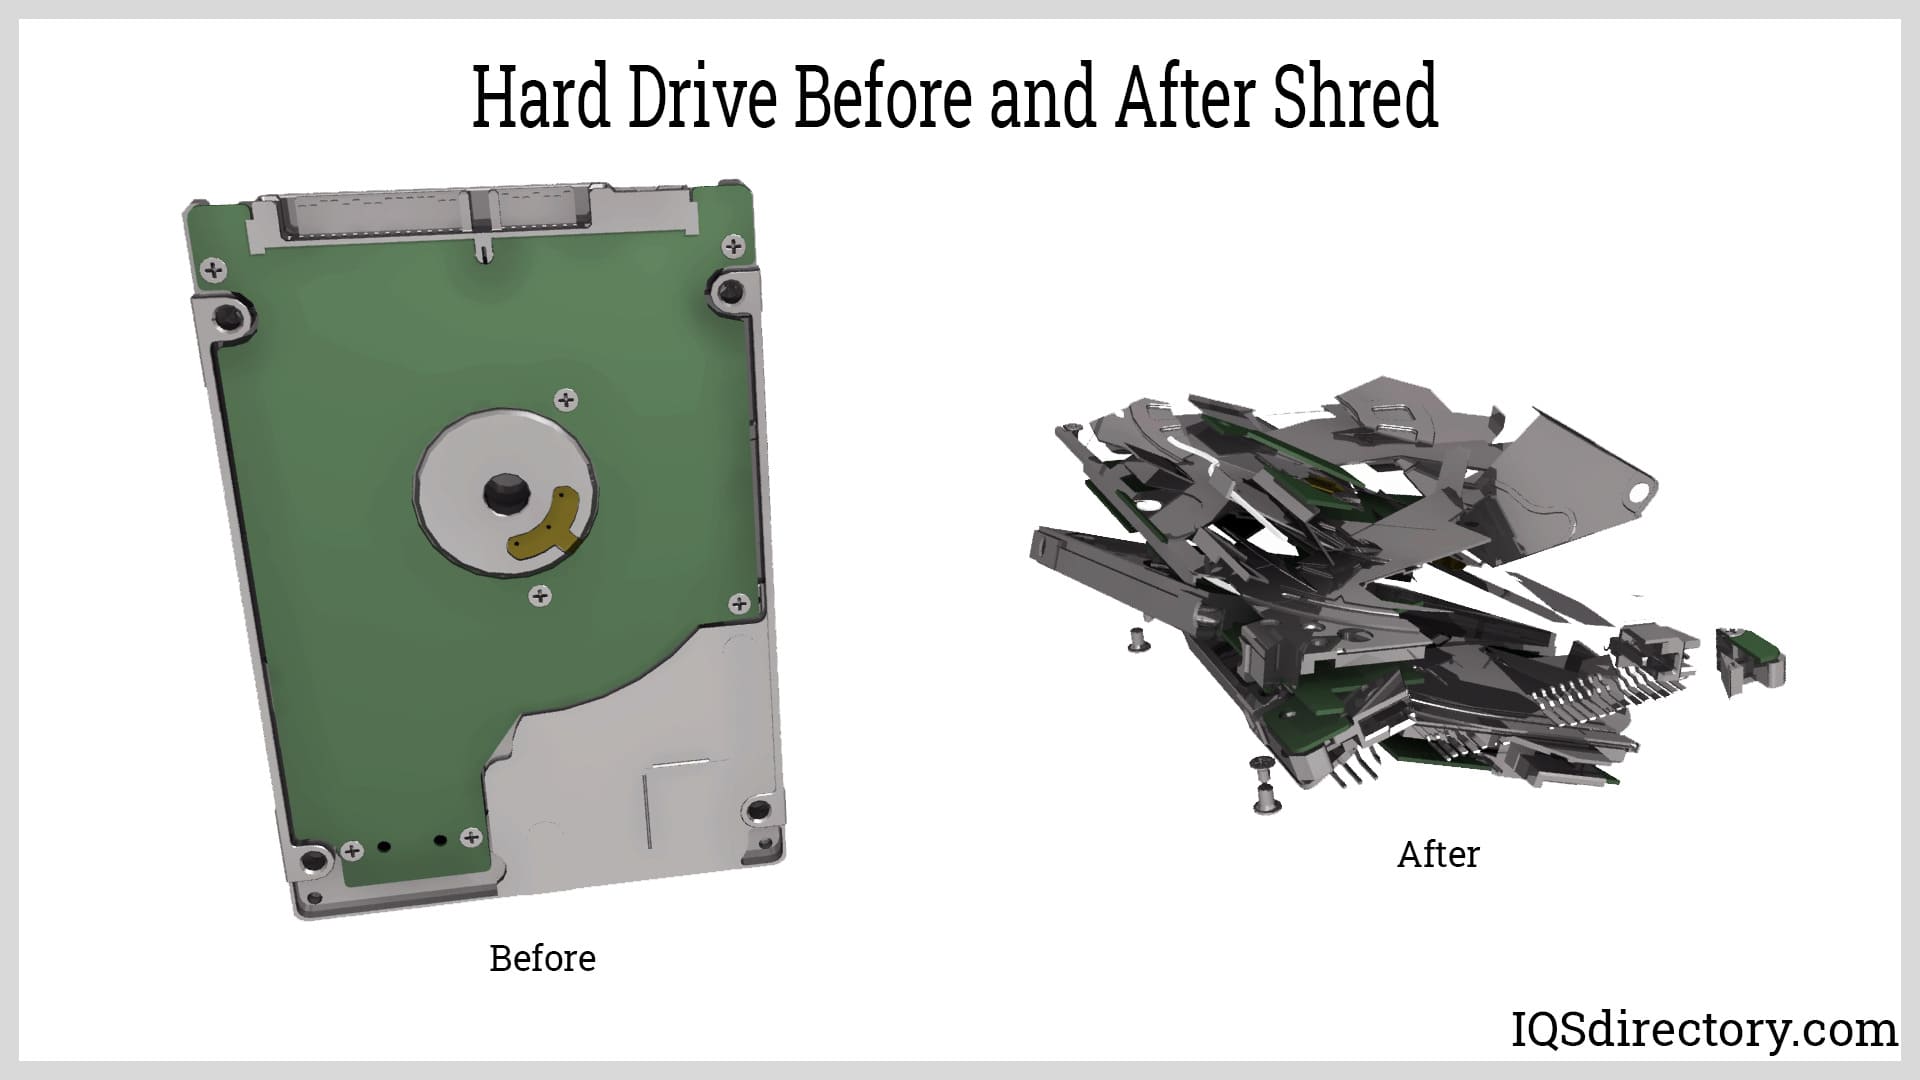 Hard drive before and After Shred